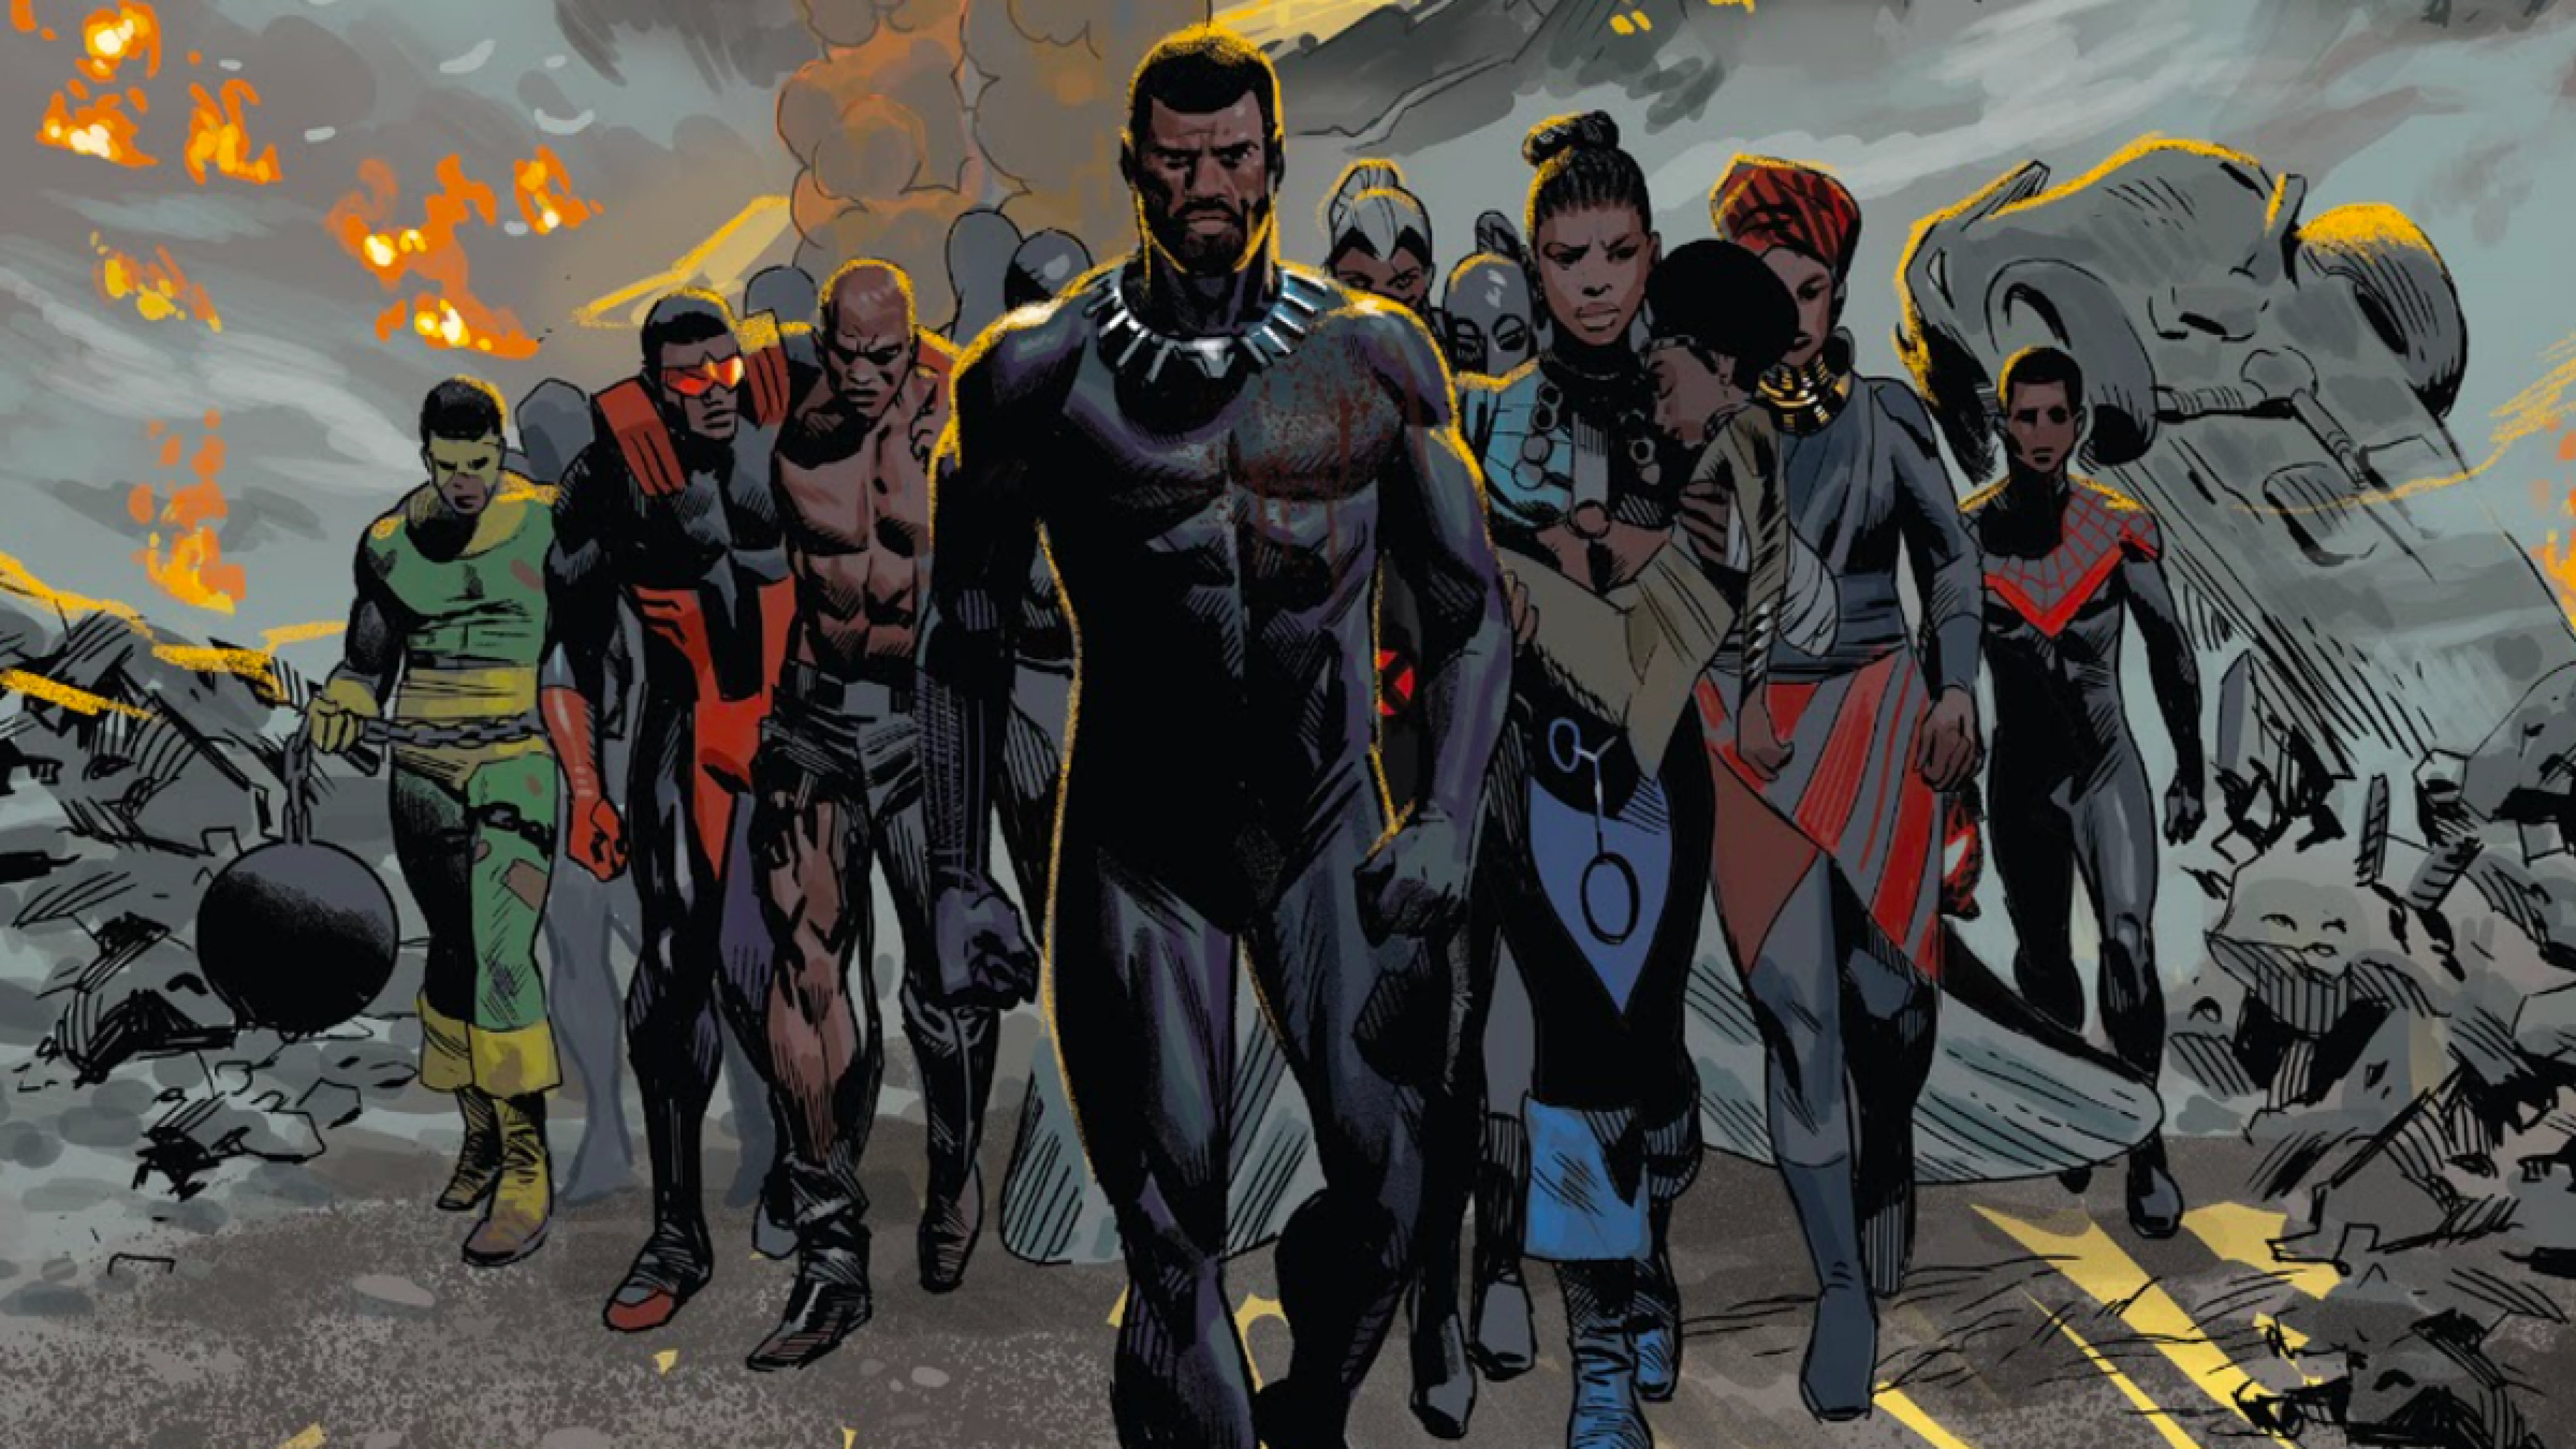 Black Panther Writer Ta-Nehisi Coates Wants Better for Creators Bringing These Stories to Life